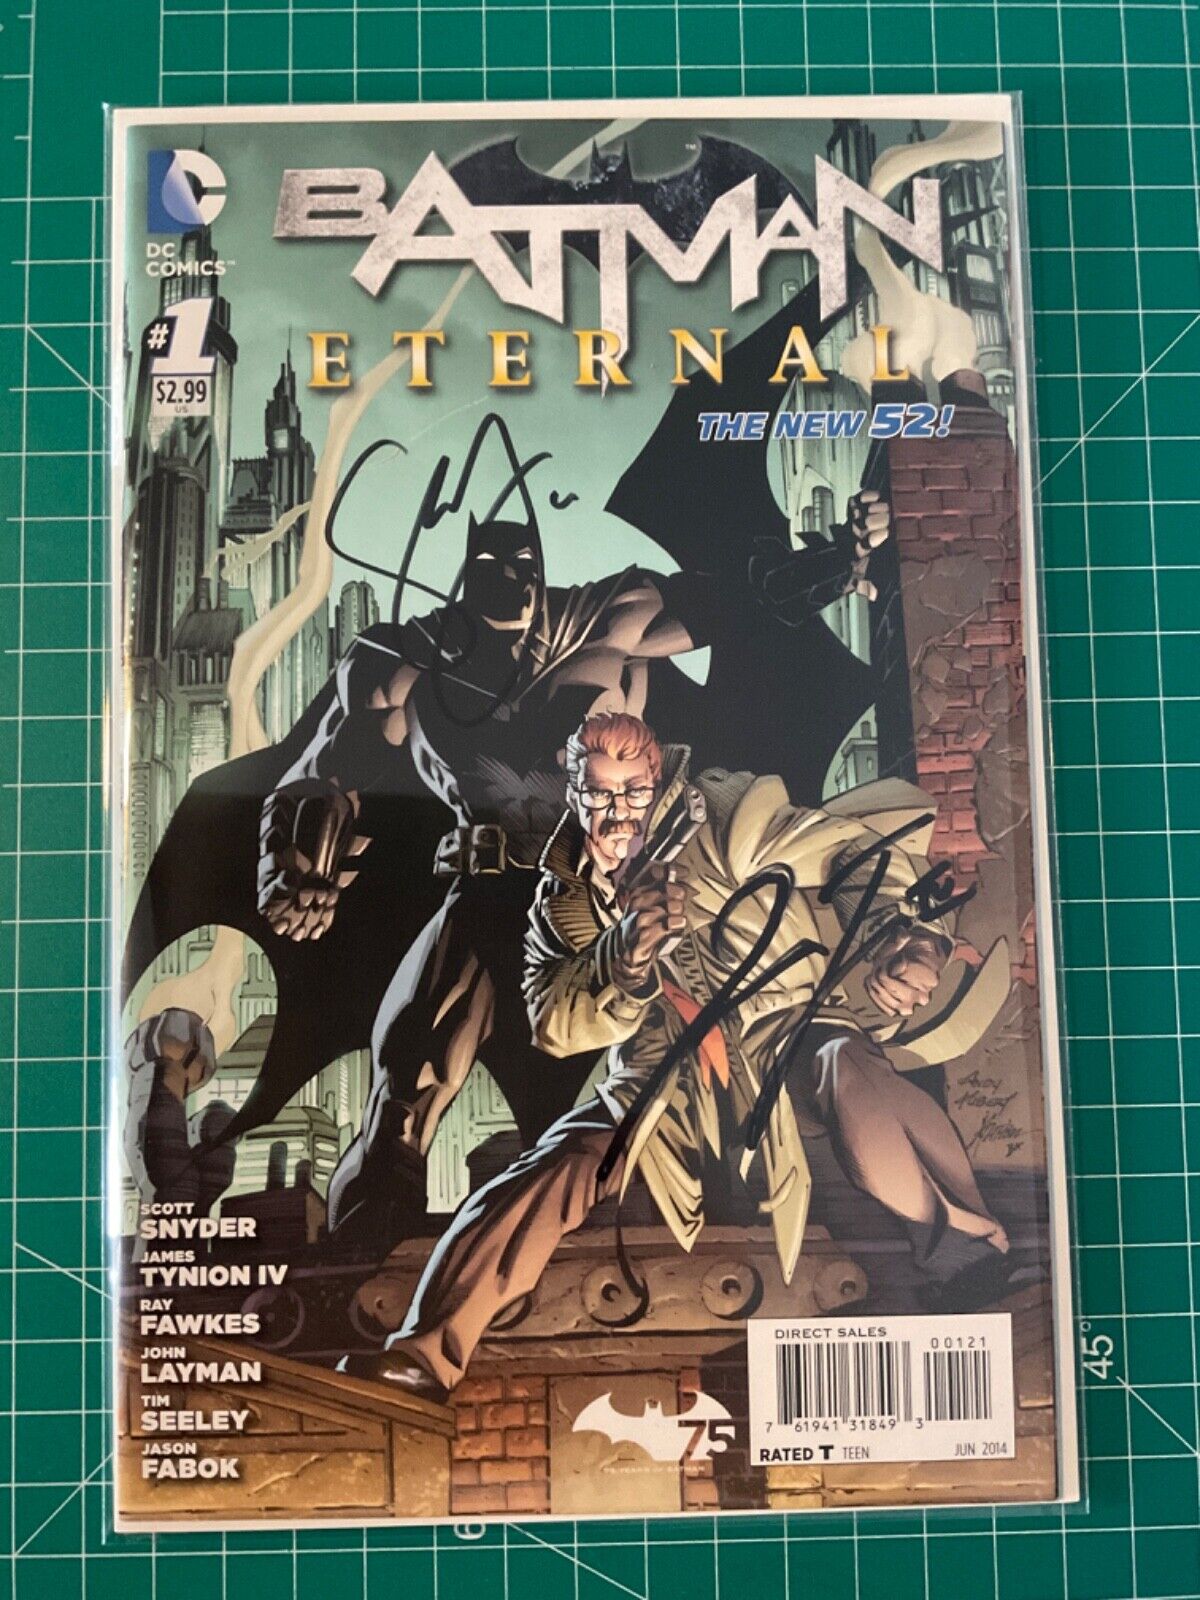 BATMAN ETERNAL #1 HTF NM 1:50 Variant Signed by Scott Snyder and James Tynion IV